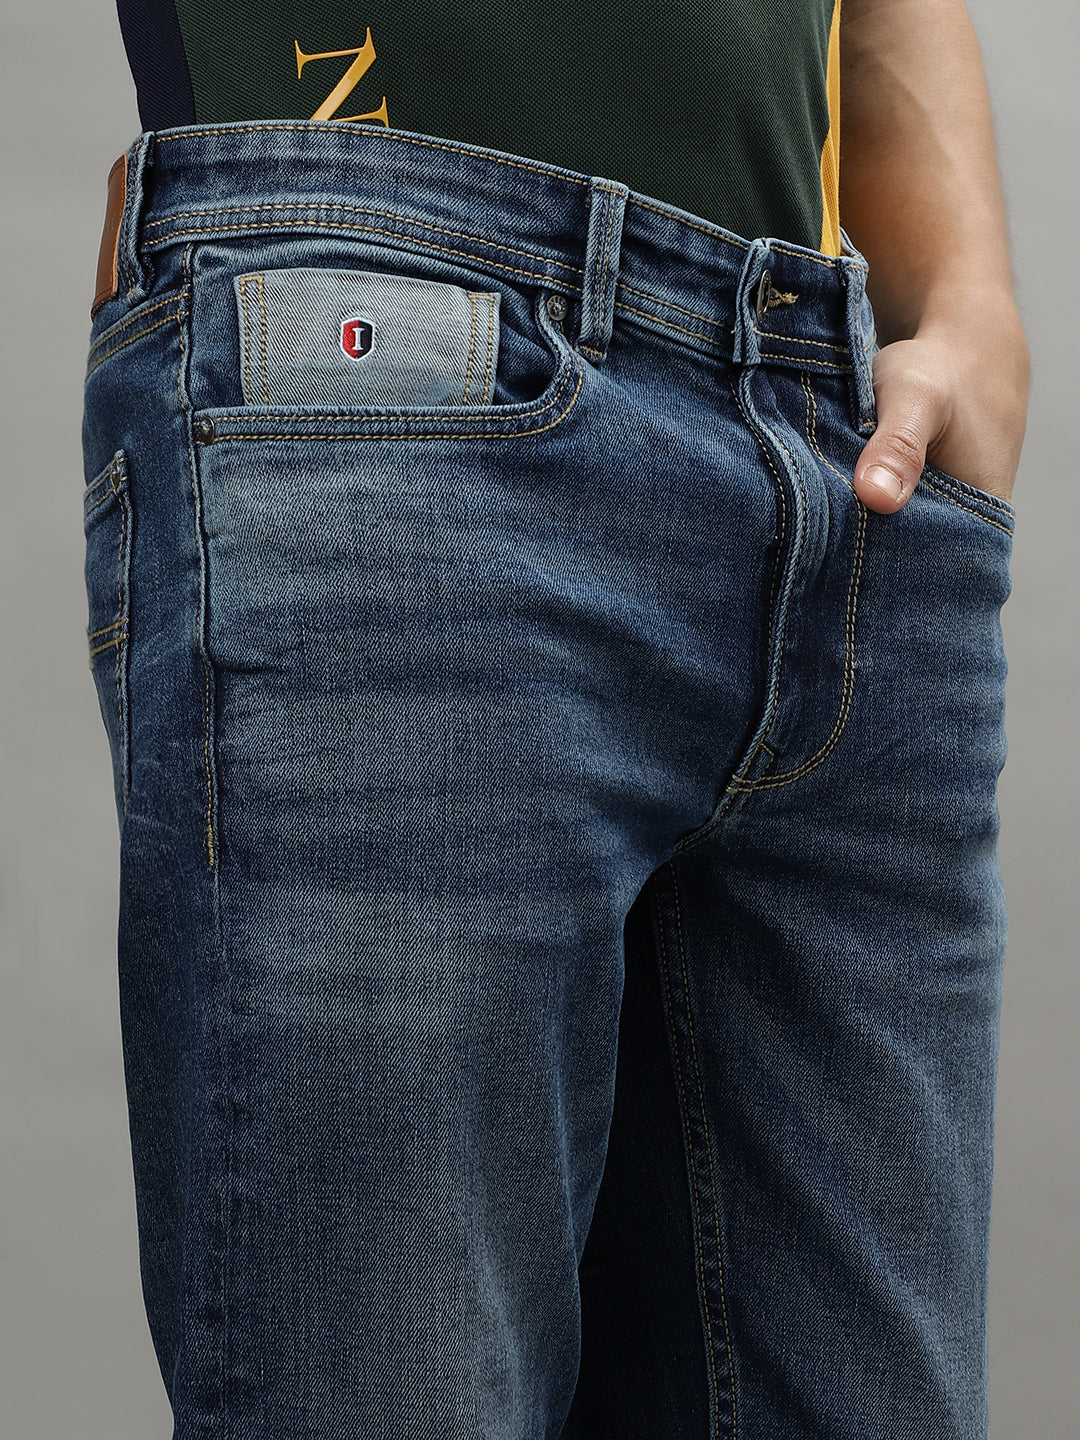 Iconic Men Blue Washed Mid-Rise Skinny Fit Jeans